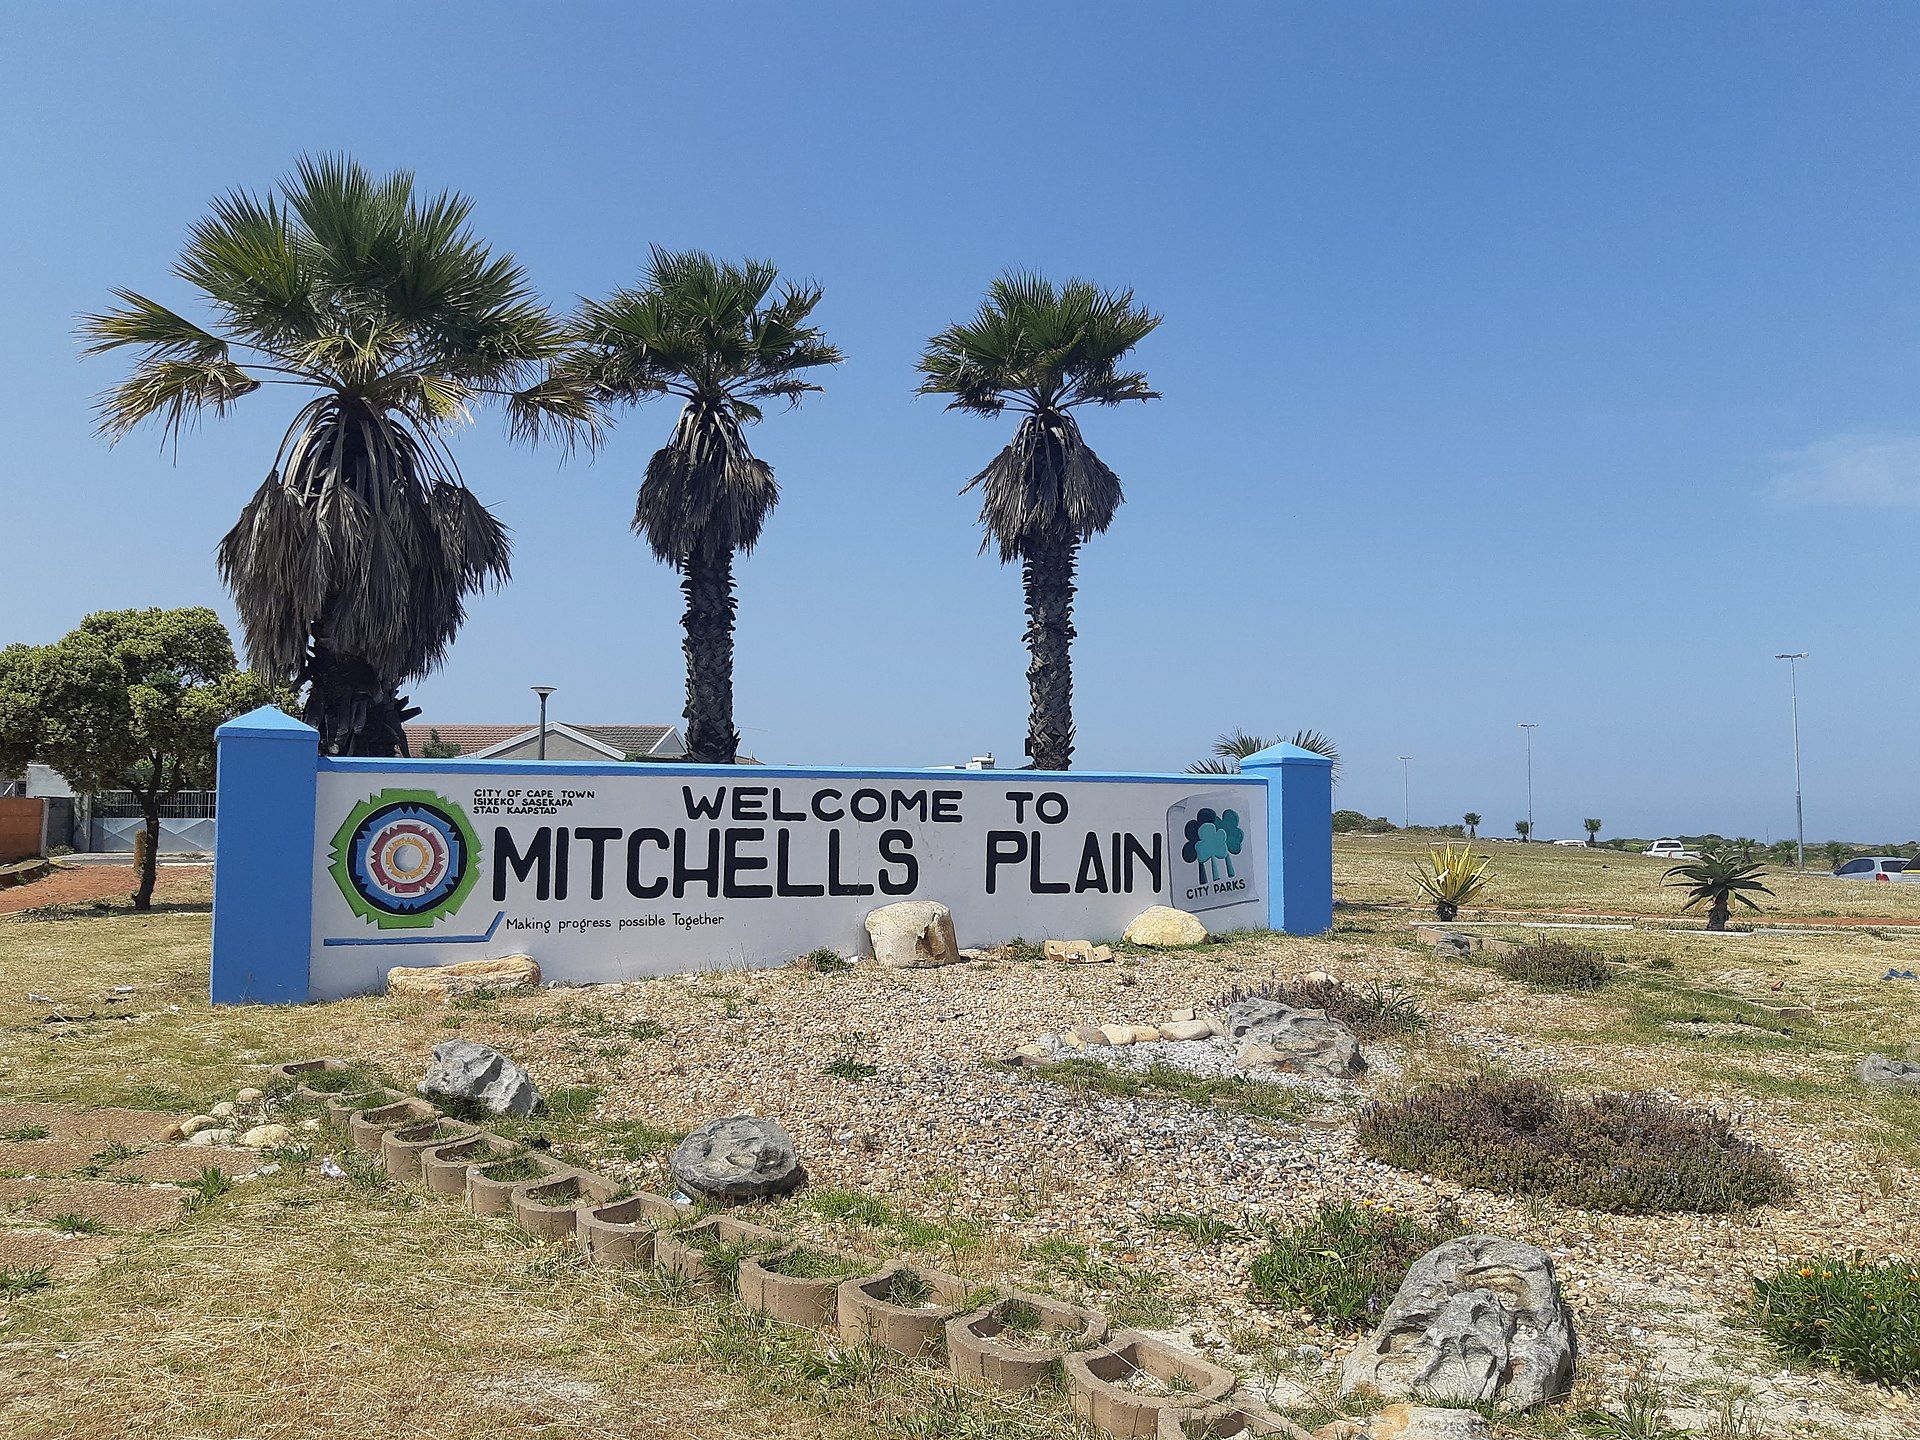 Outsourcing firm launches new South African venture with Cape Town’s Mitchell’s Plain set to see new jobs